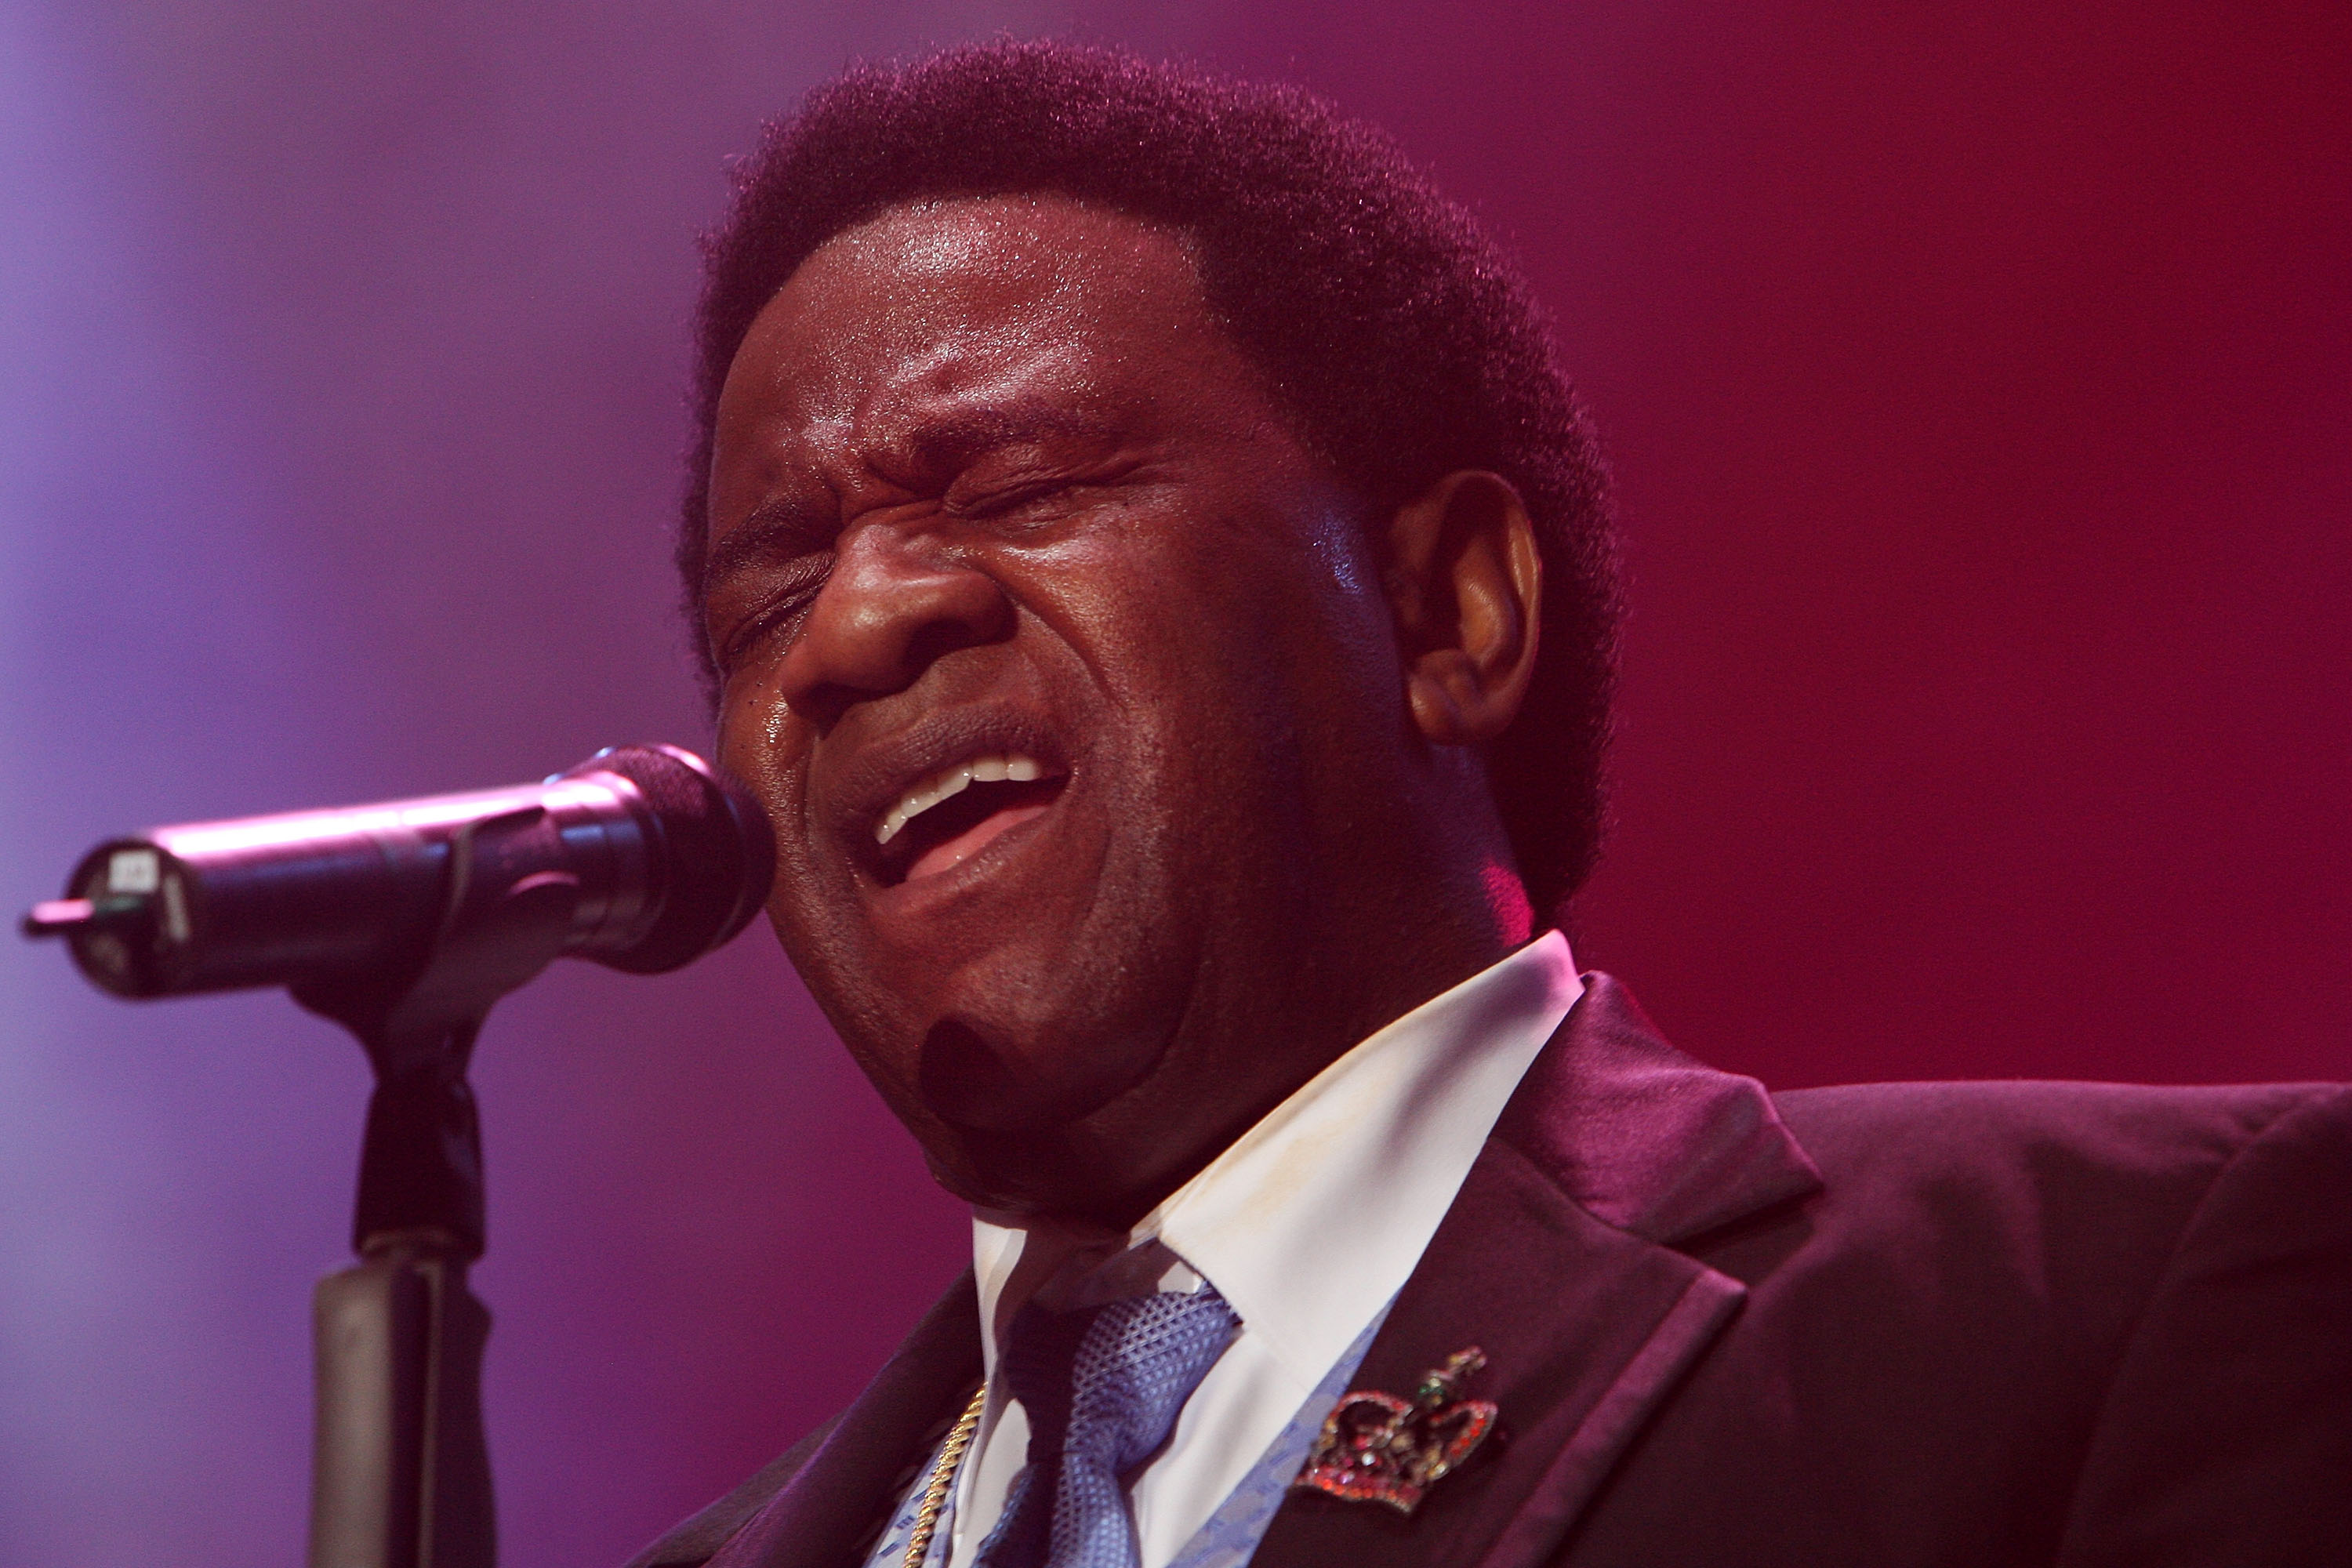 Hear Al Green's First Song in Over 10 Years "Before the Next Teardrop Falls"